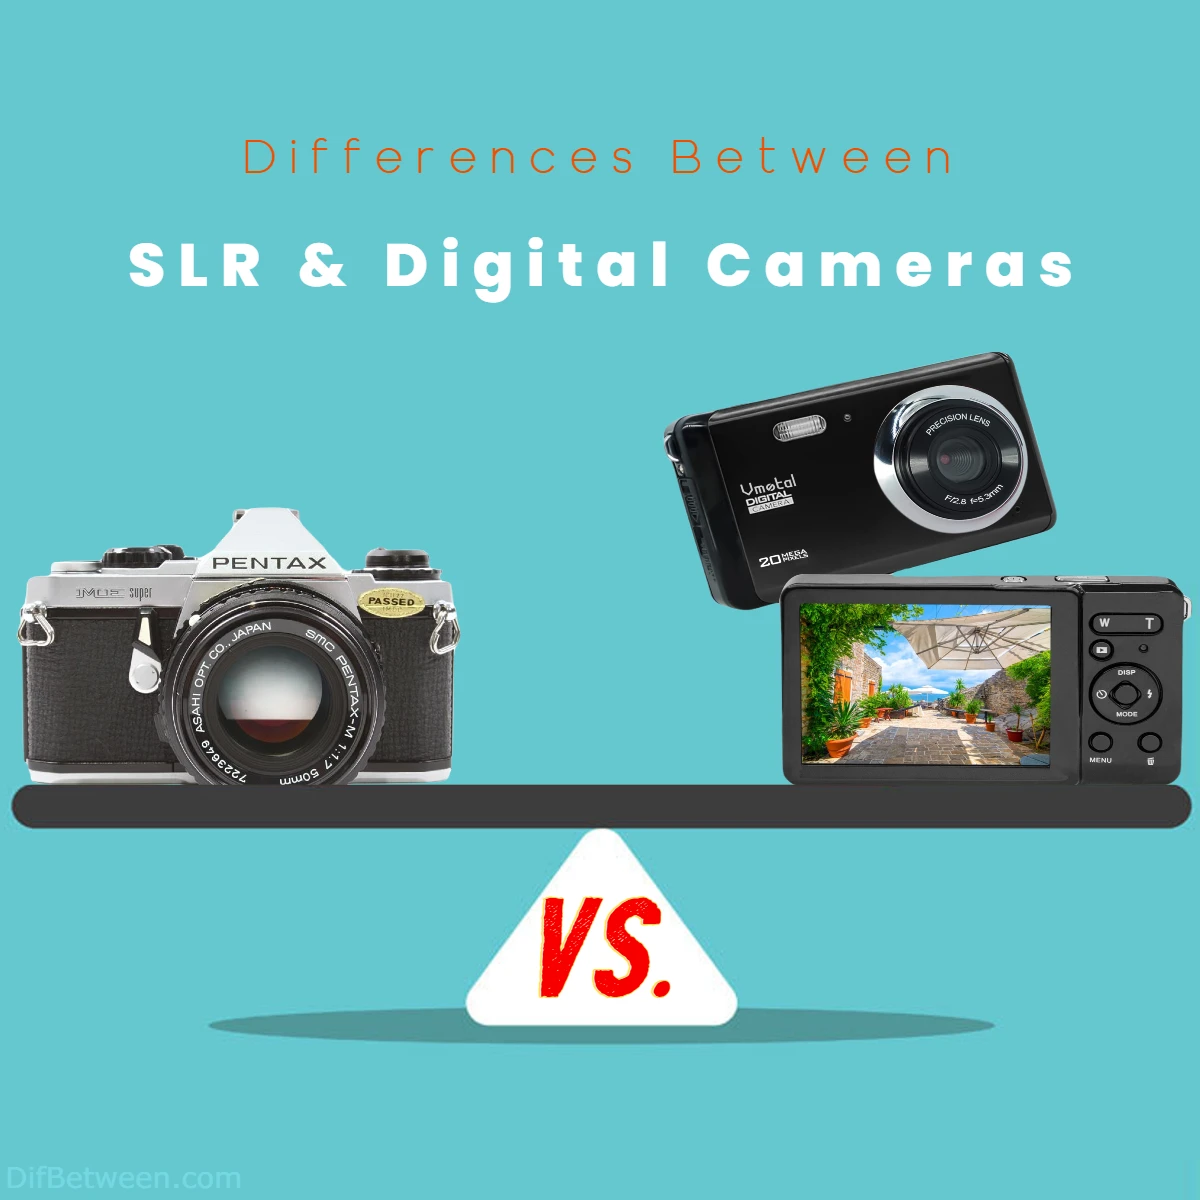 Difference Between Digital Cameras and SLR Cameras